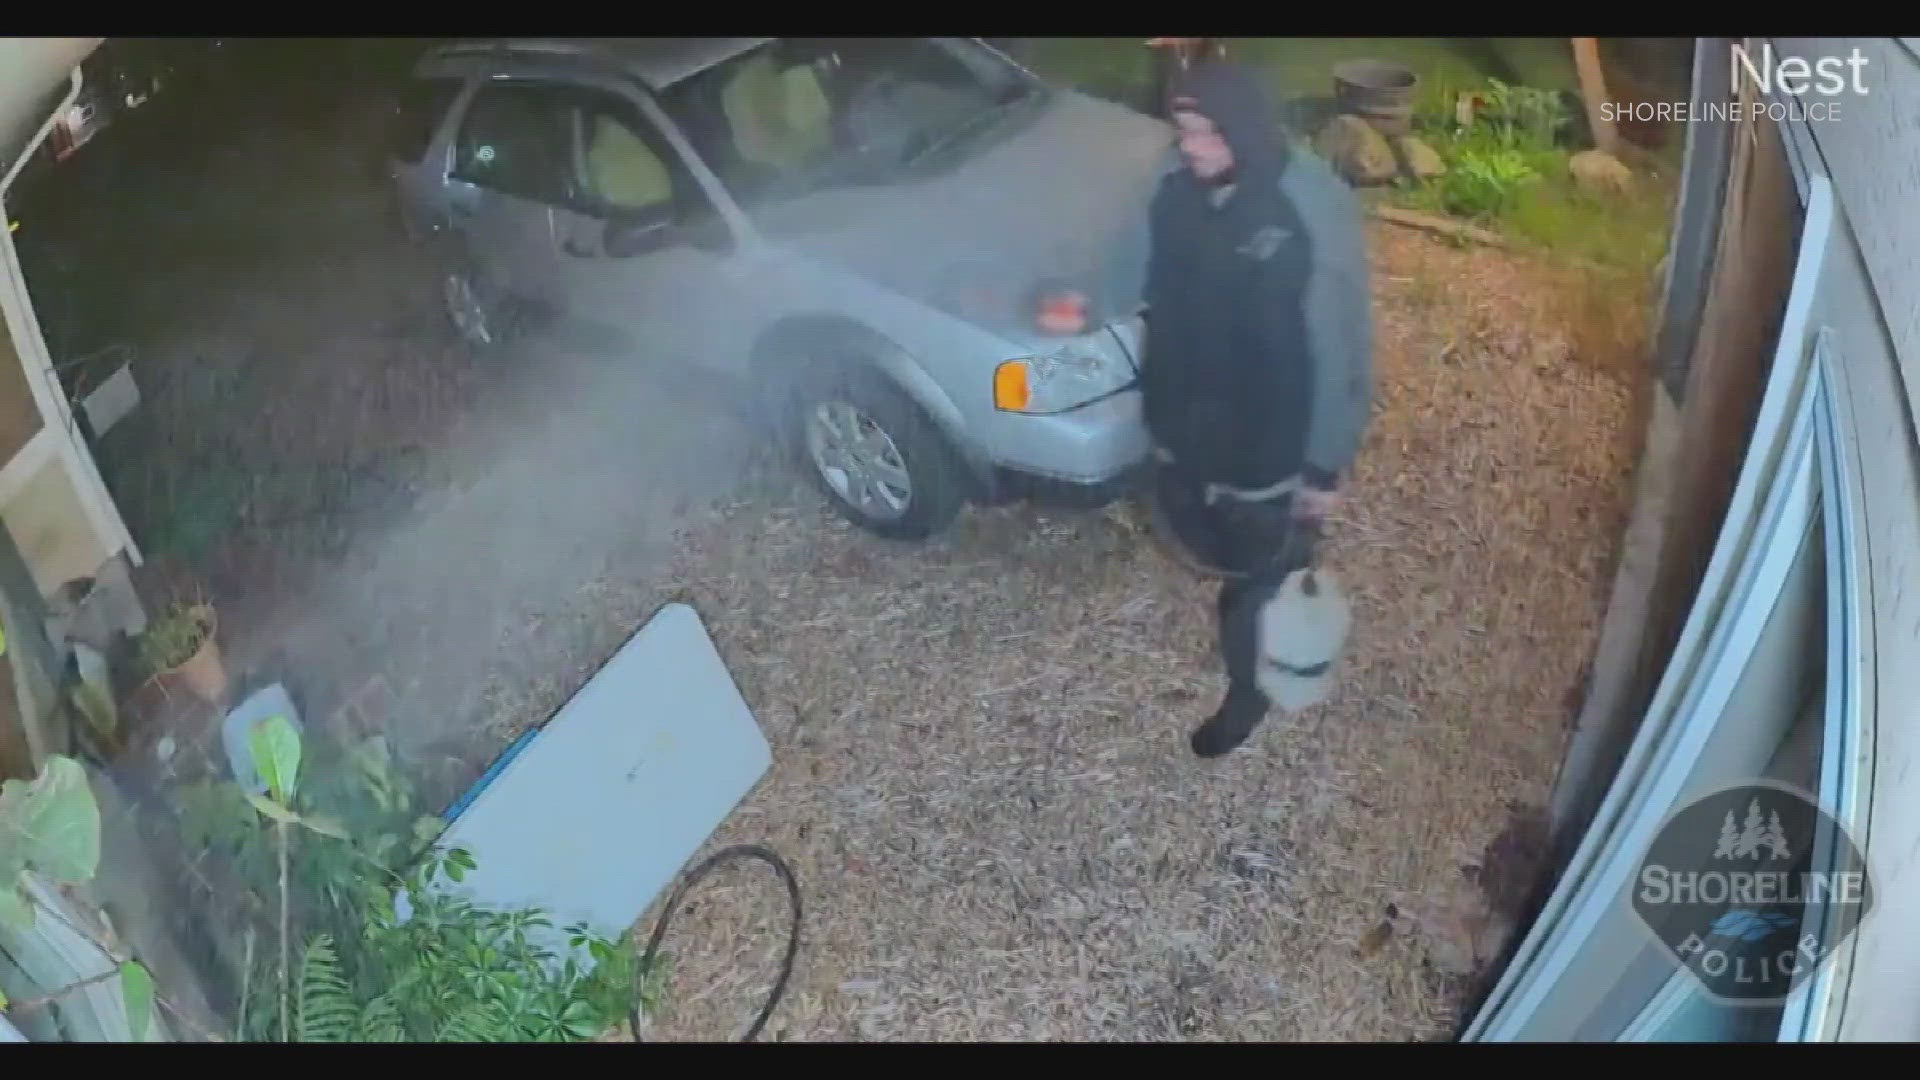 Nest camera footage from a home in Shoreline shows a man dousing a home and car in accelerant before setting it on fire